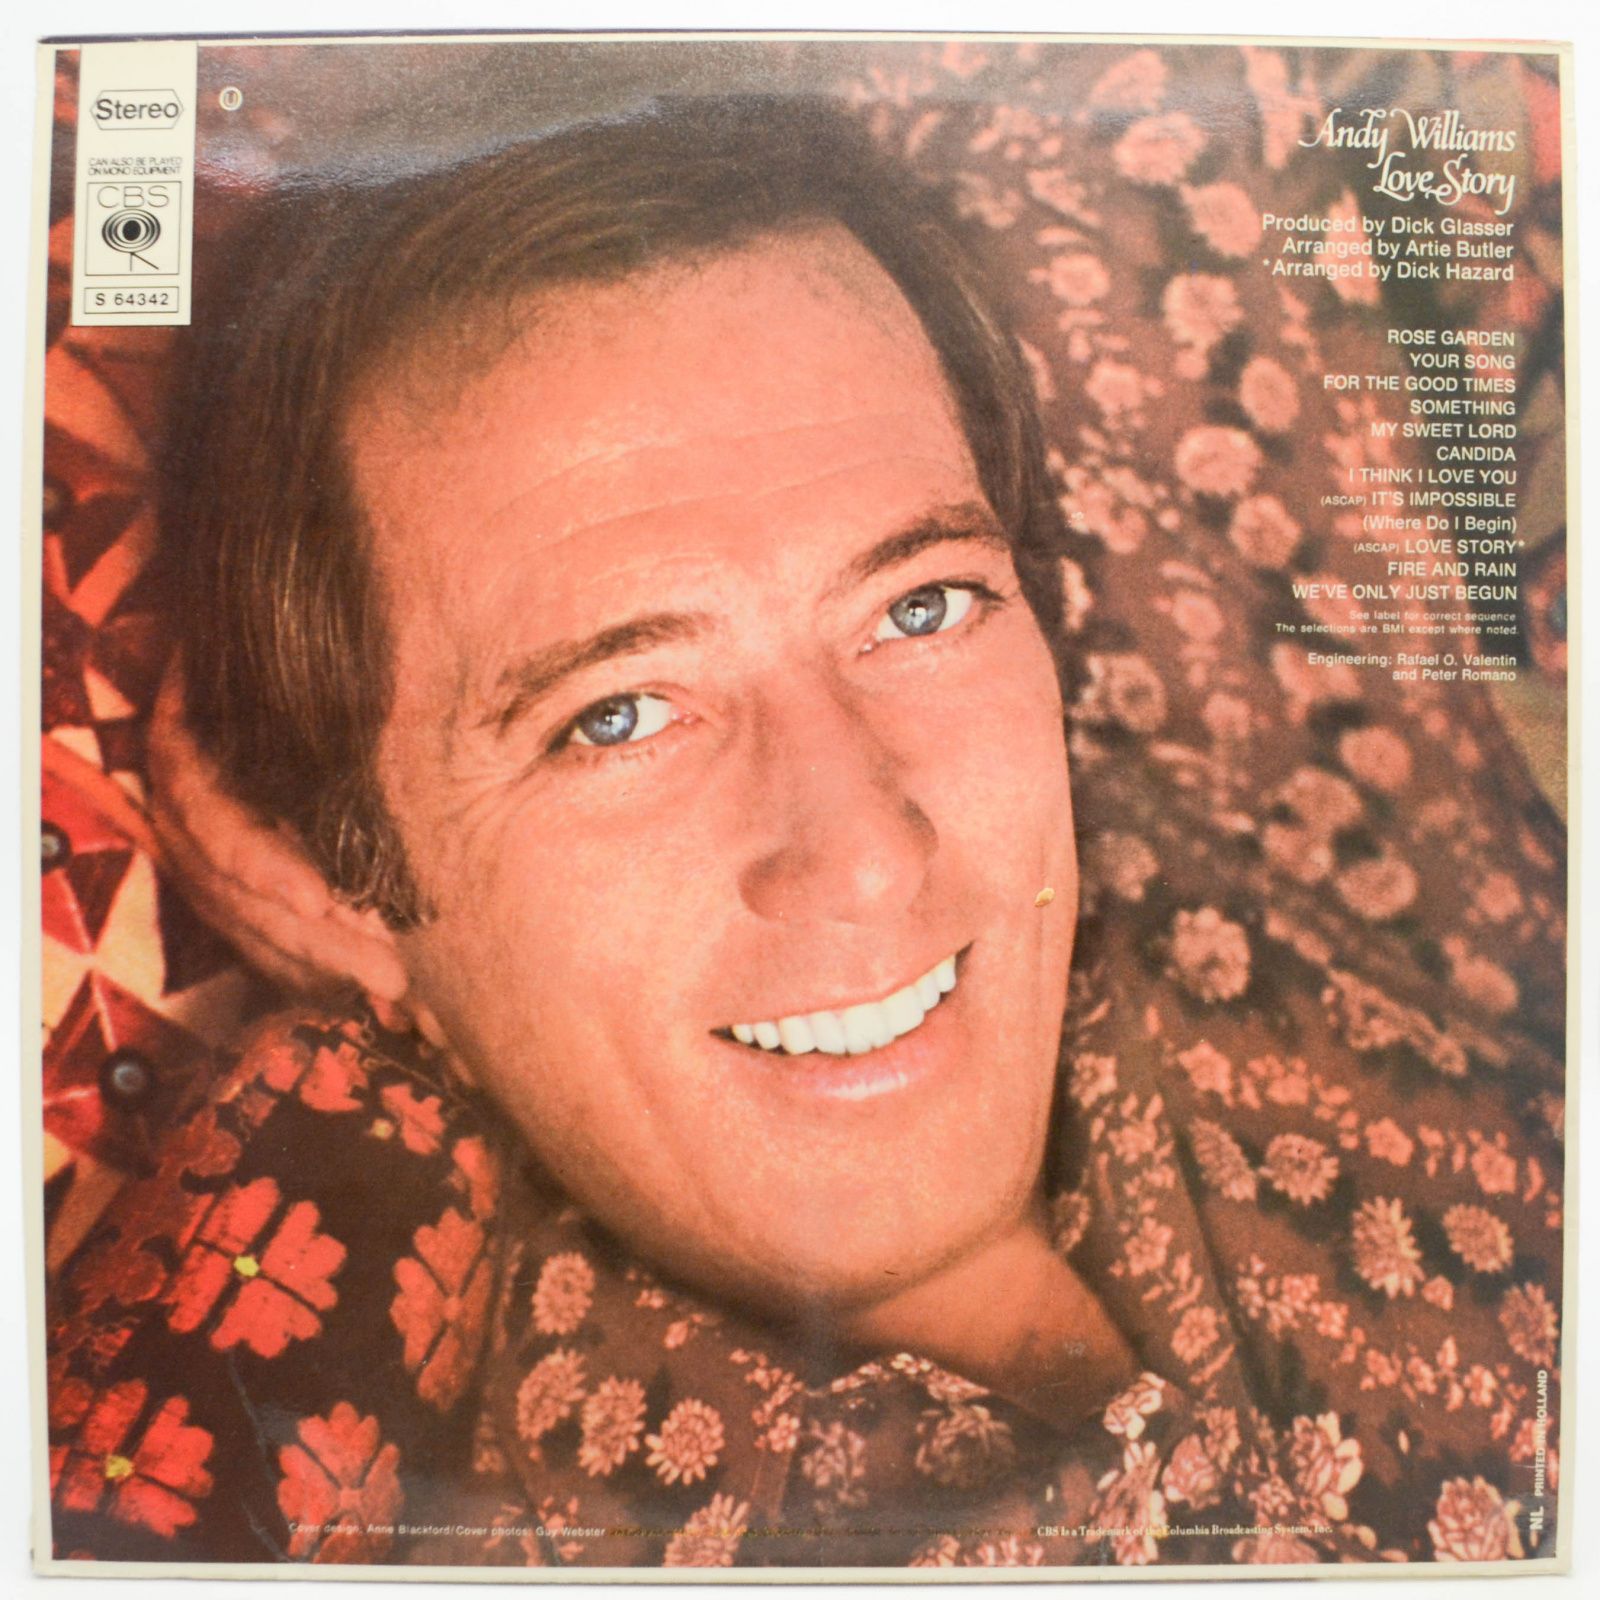 Andy Williams — Love Story, 1971